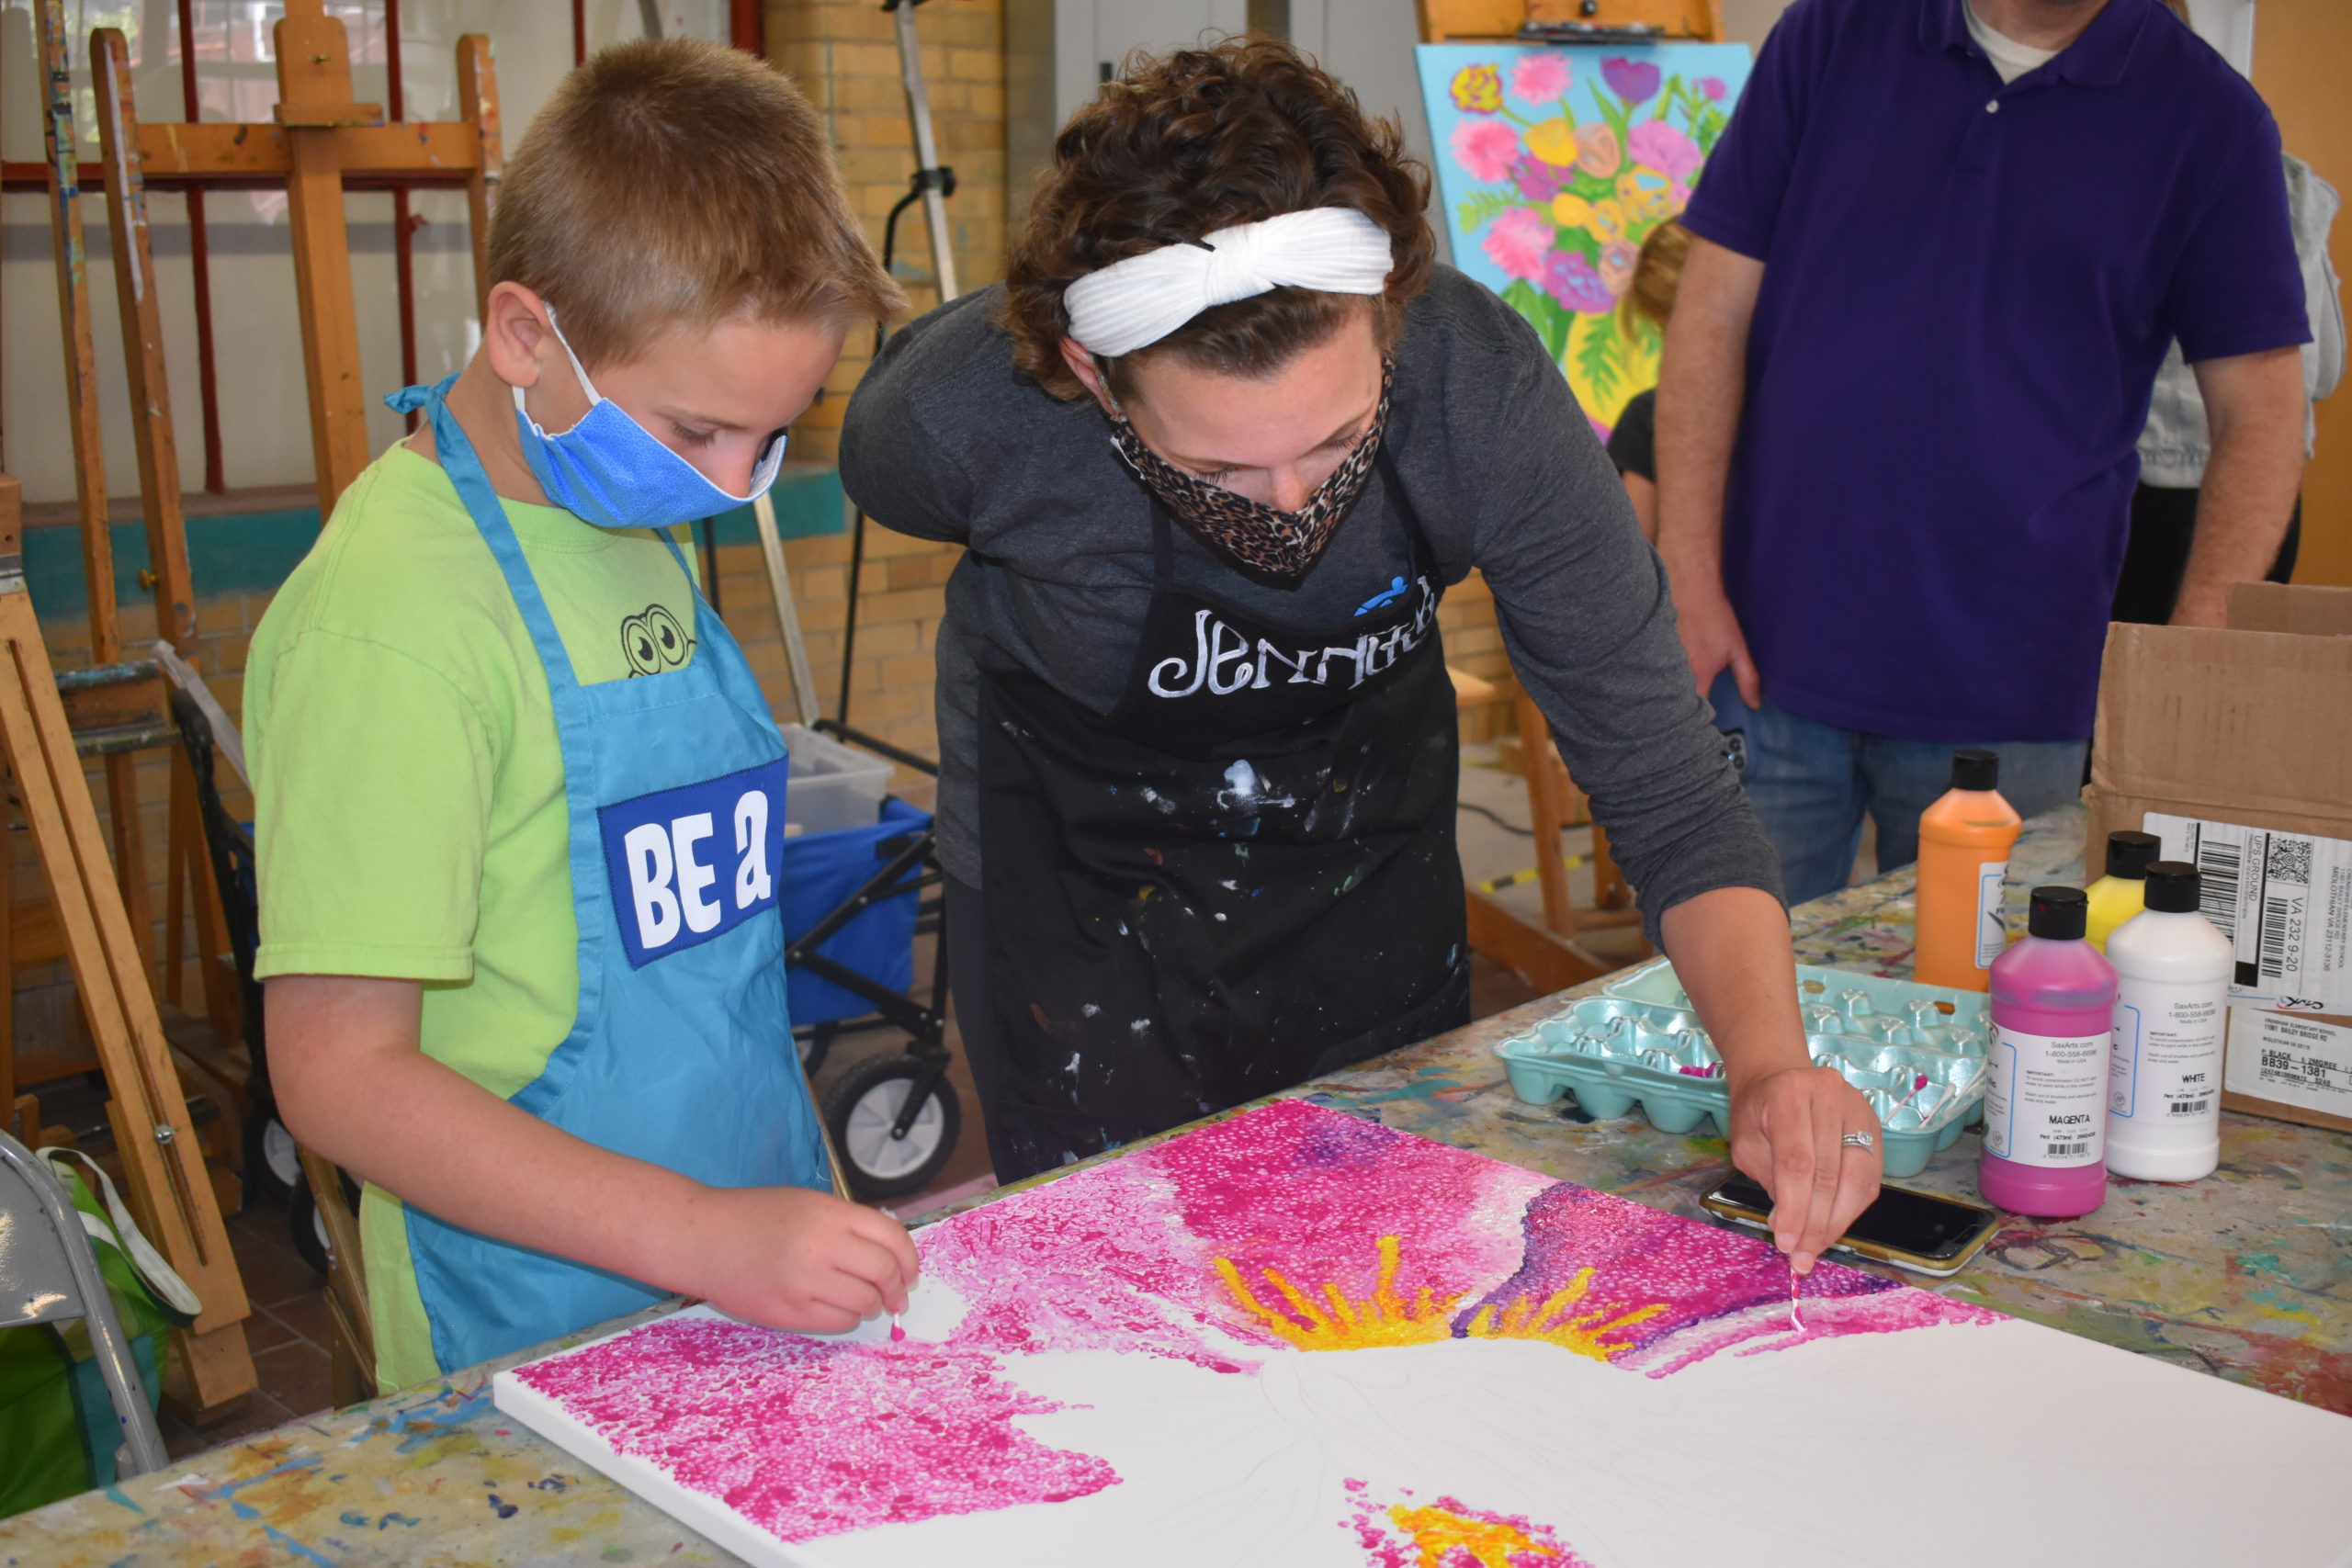 An artist helps a boy paint pink dots on a large canvas